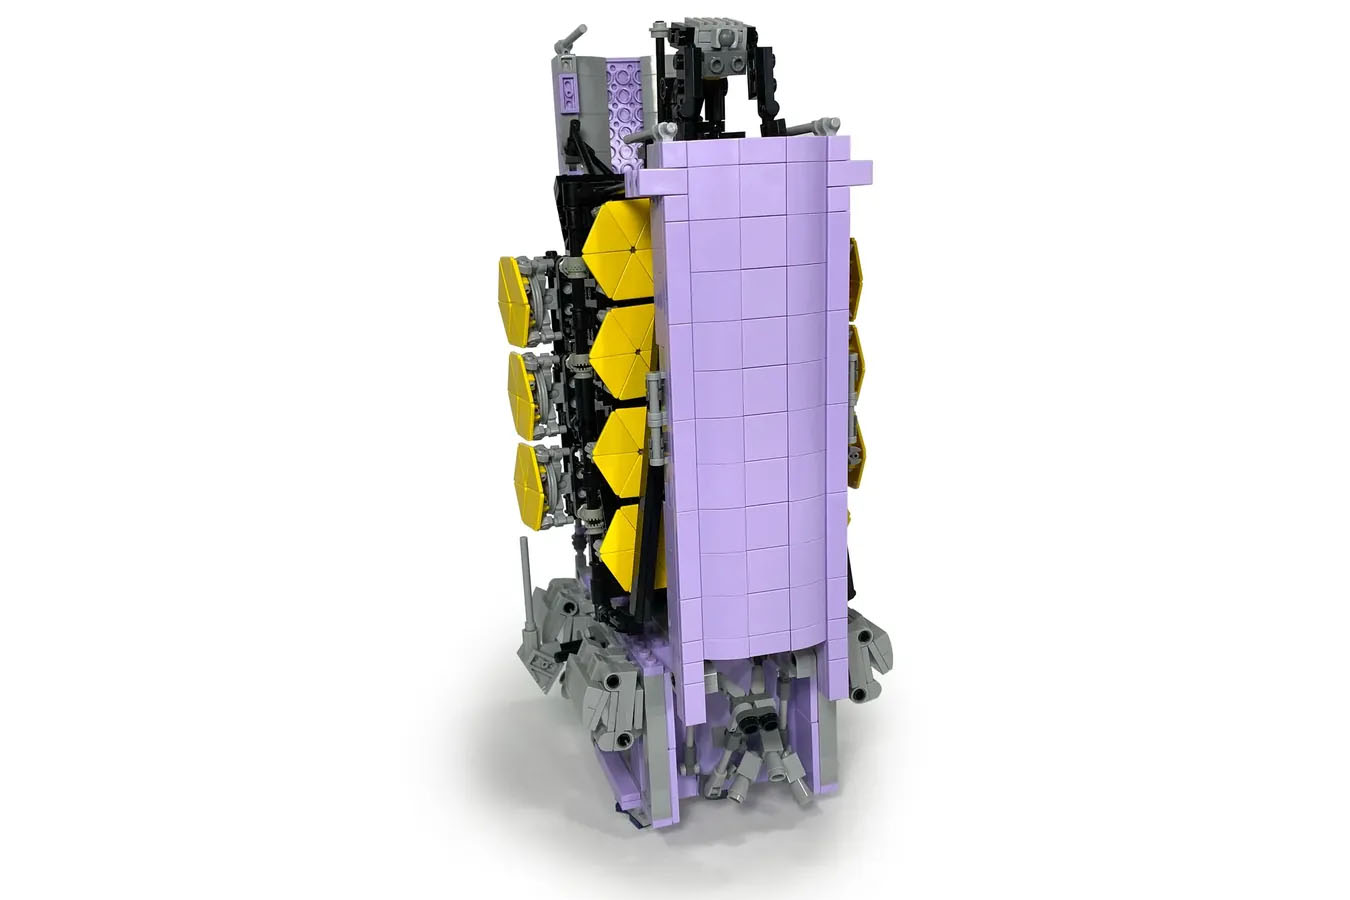 JAMES WEBB SPACE TELESCOPE Achieves 10K Support on LEGO IDEAS